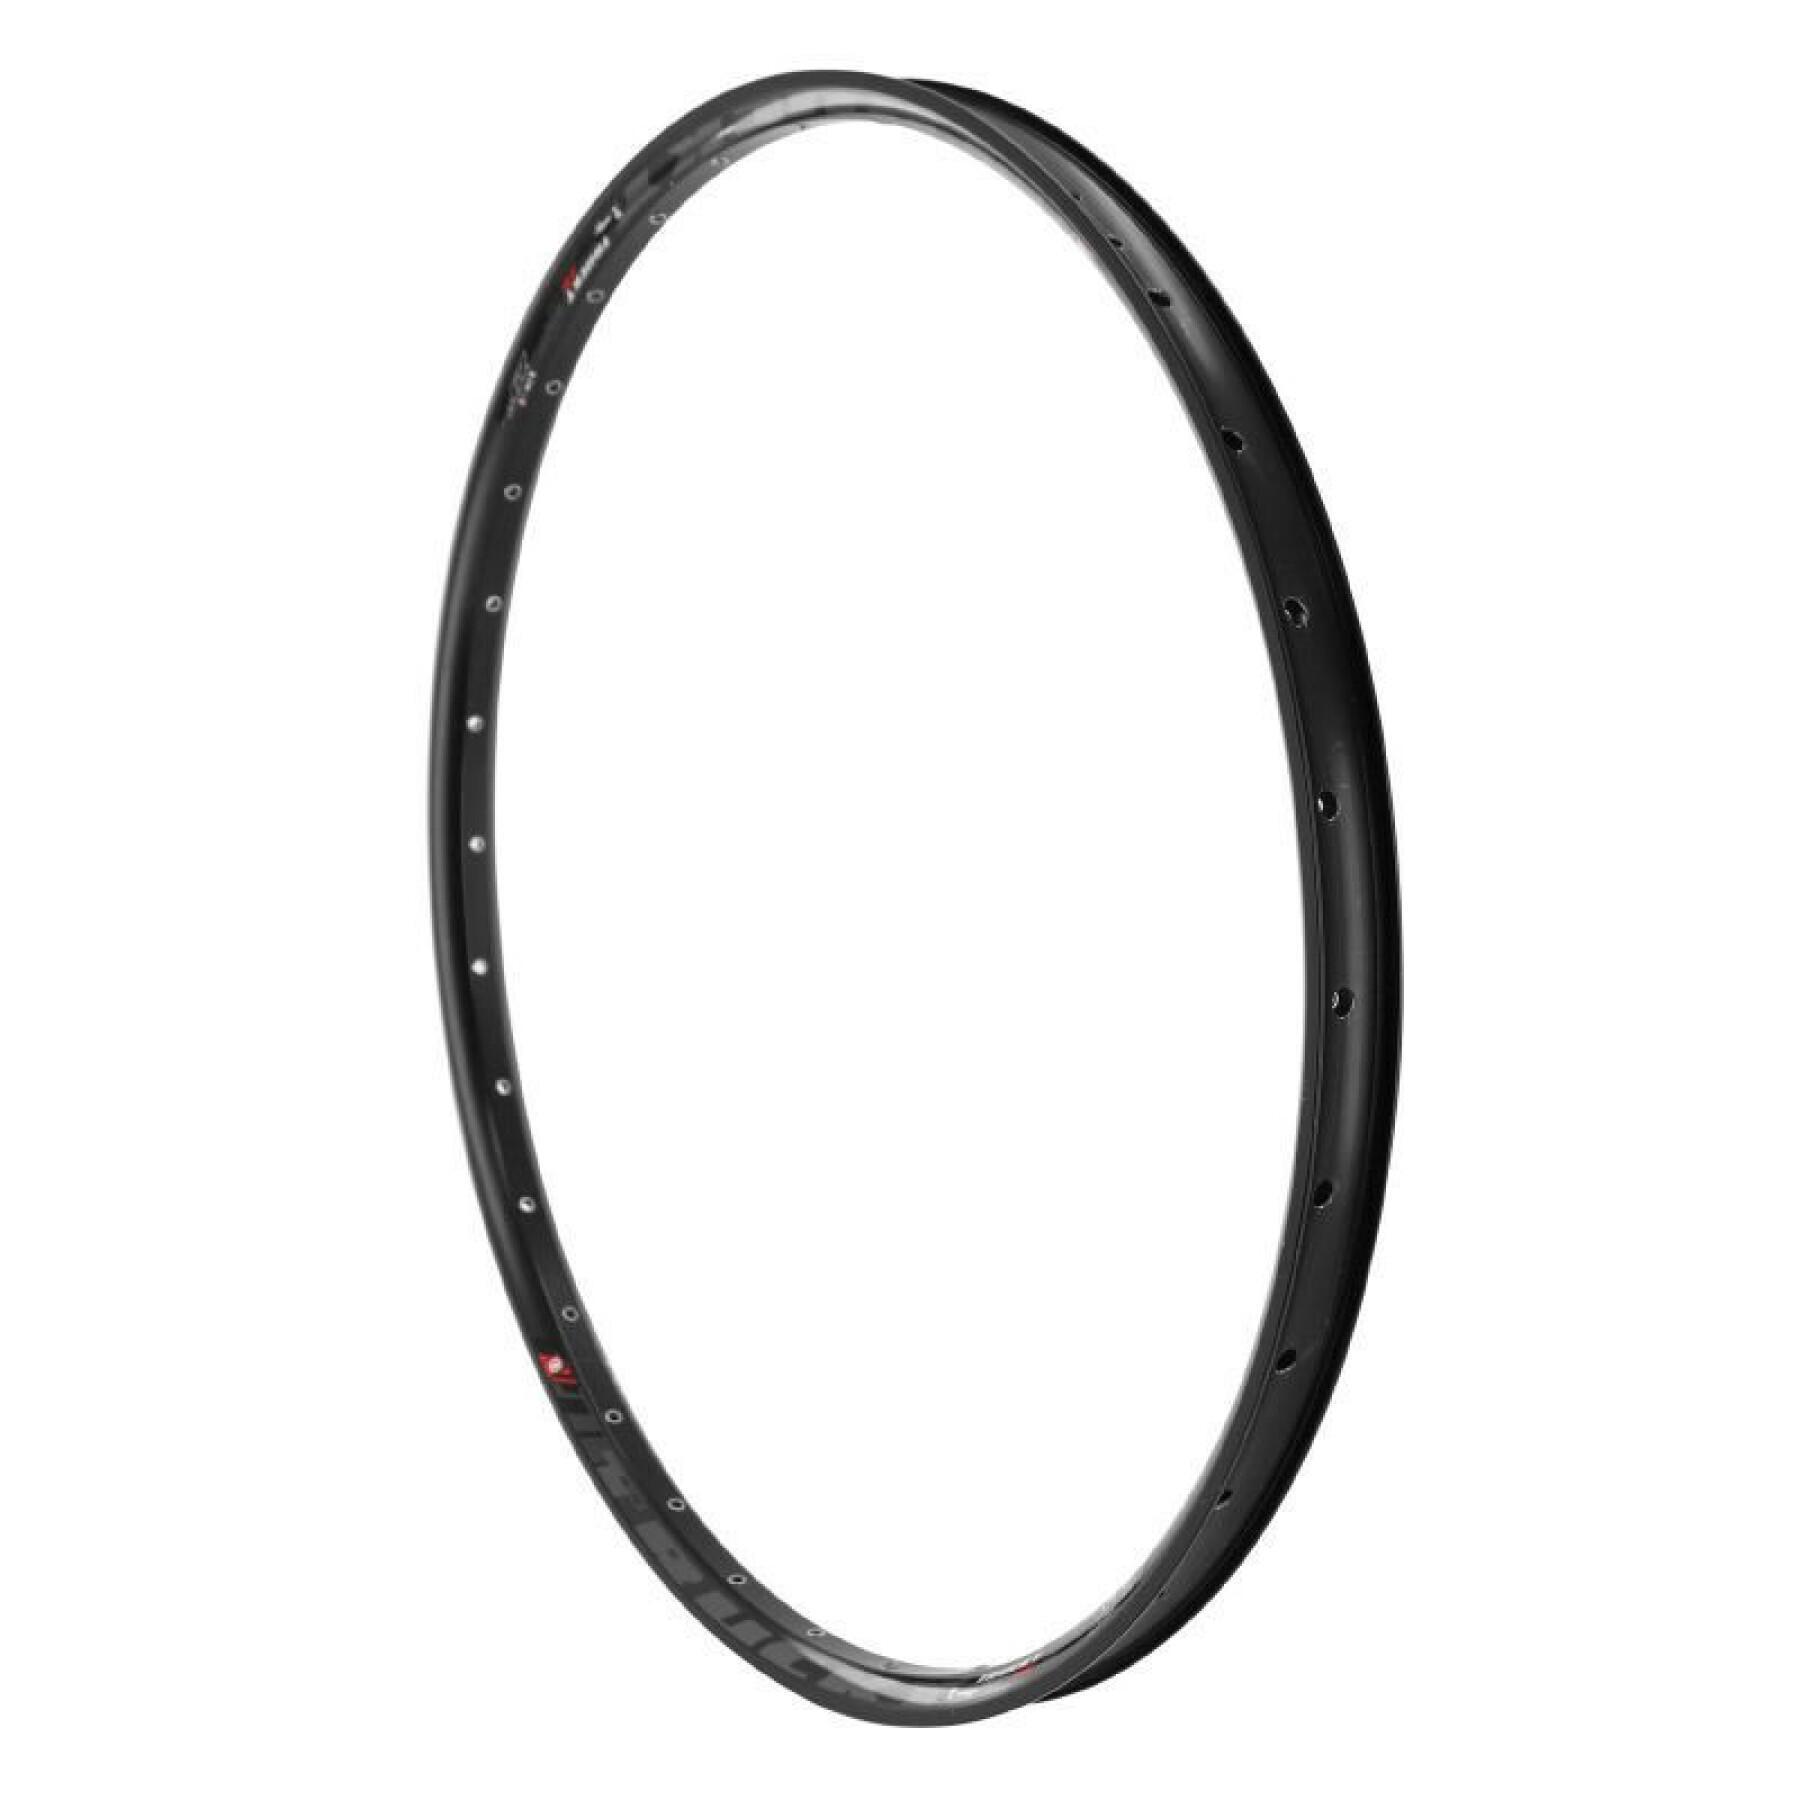 Double wall mountain bike rim with eyelets for 2.00 - 2.50 tires Velox Trucky 30 disc 32t. 30mm